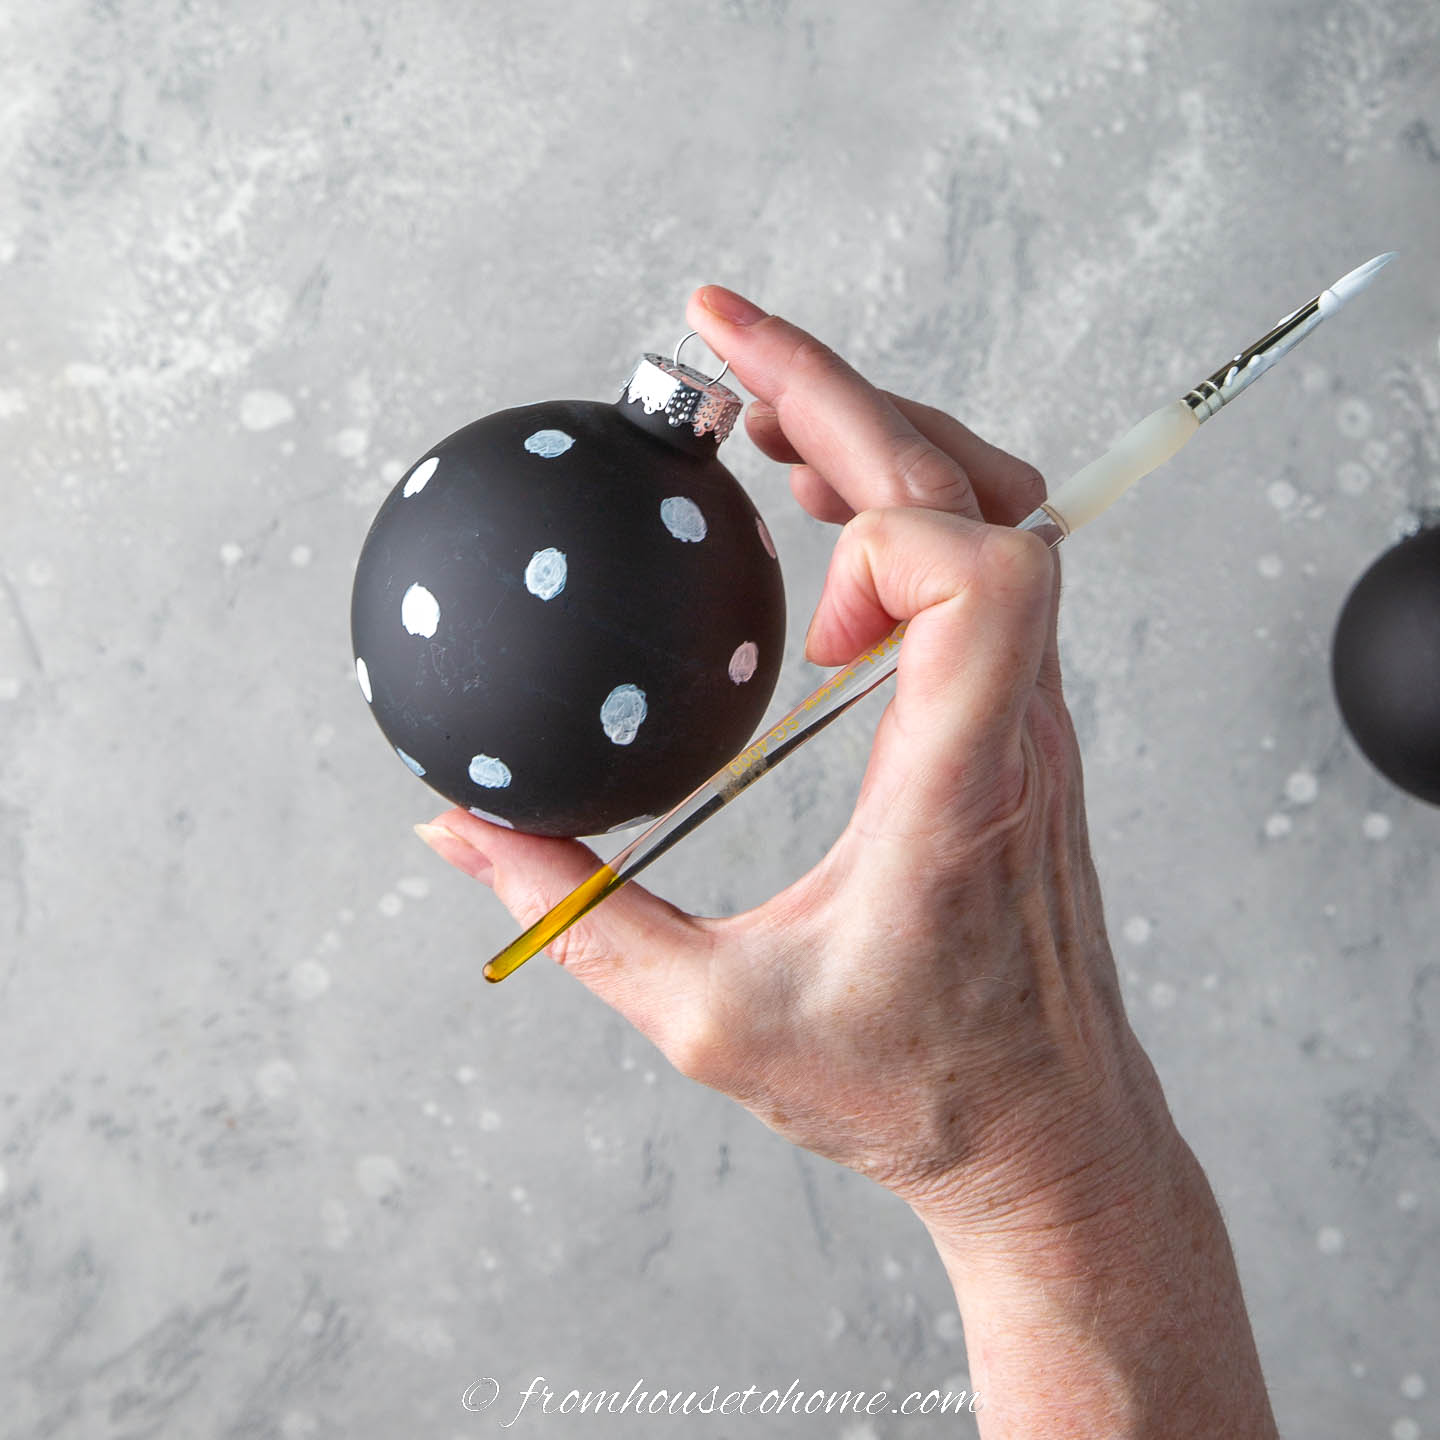 A black ornament painted with white polka dots